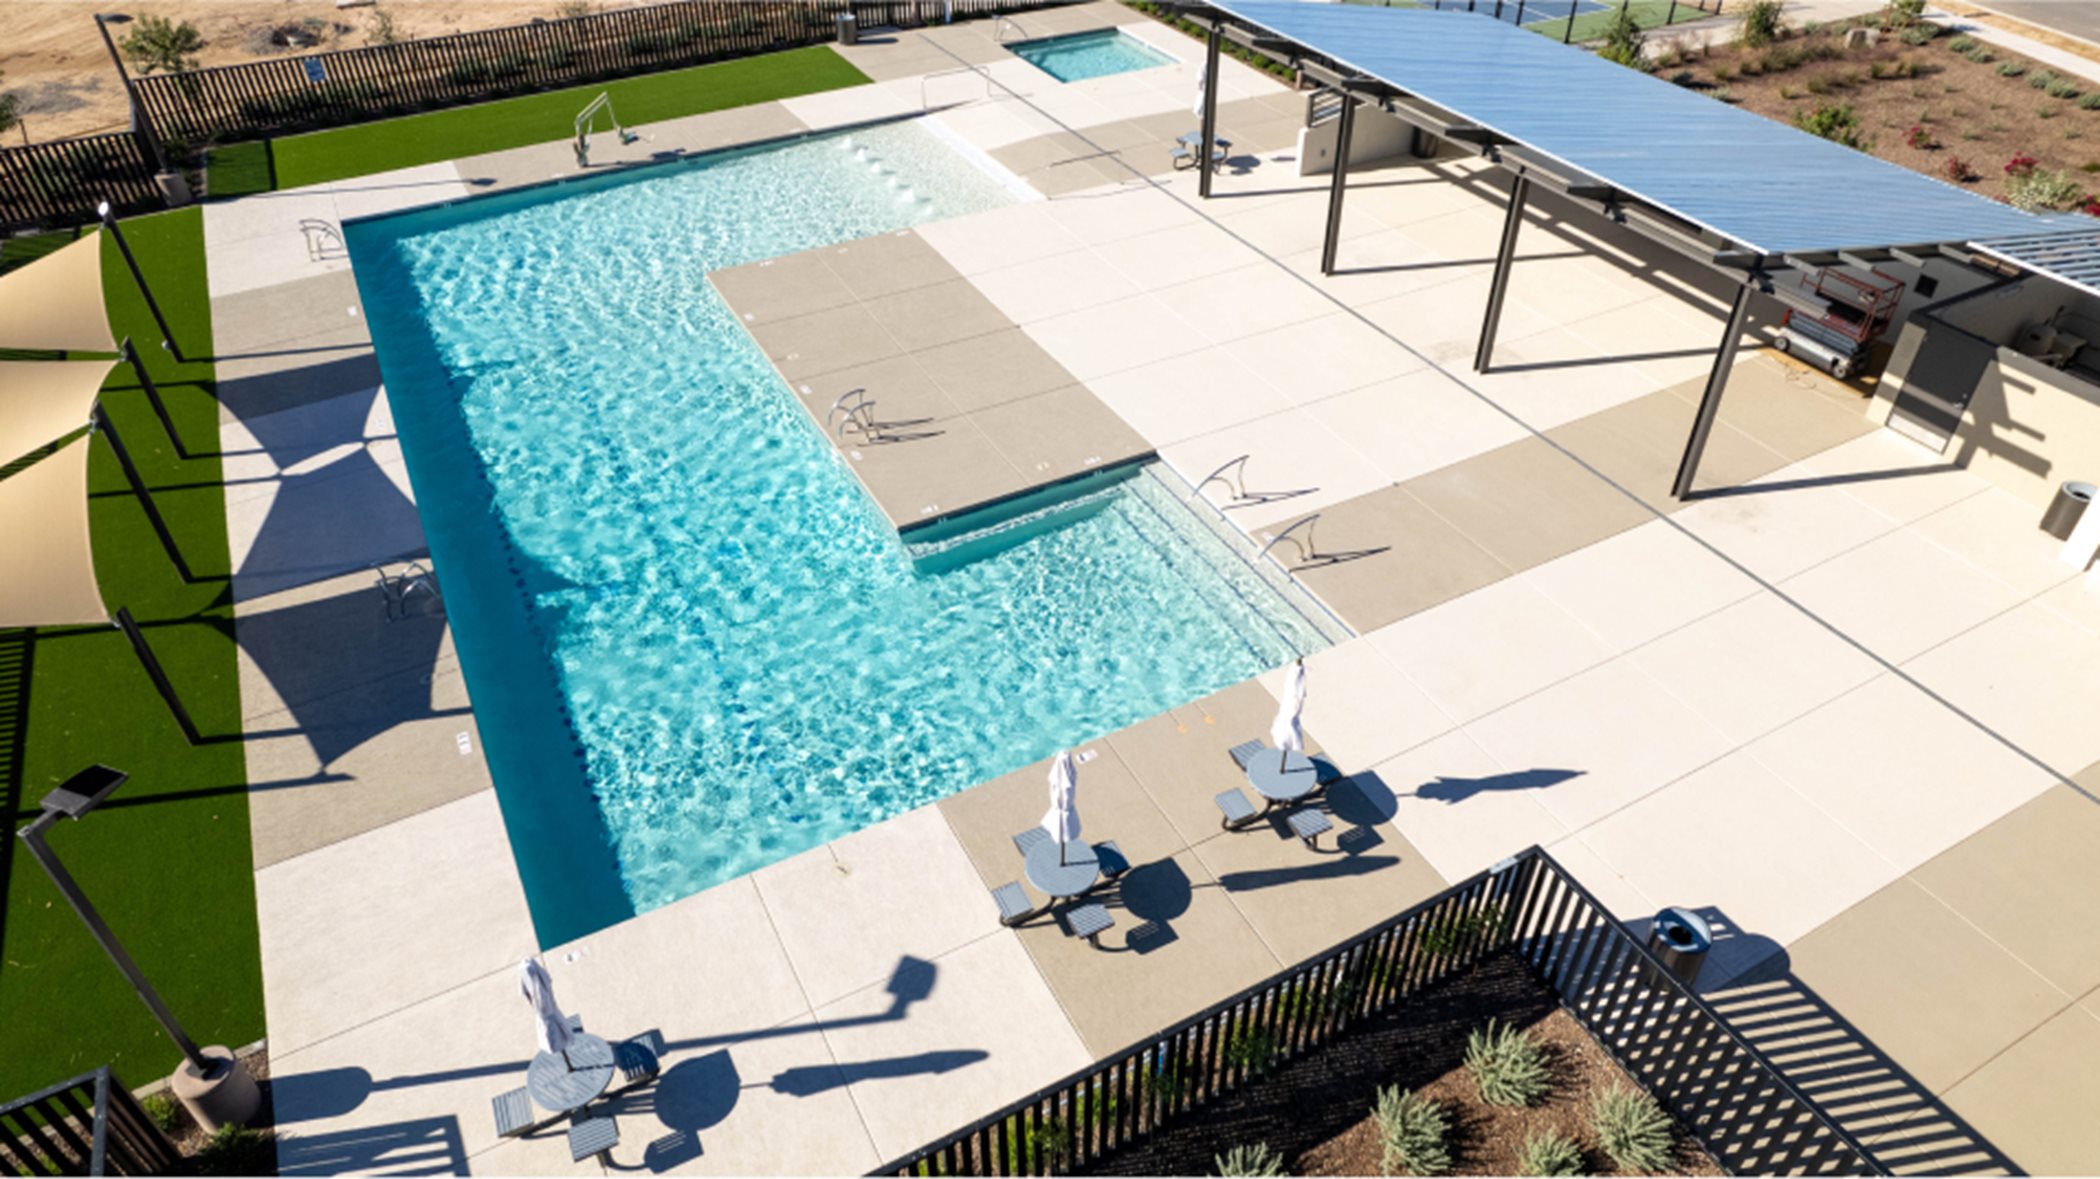 Pool and lounge chairs